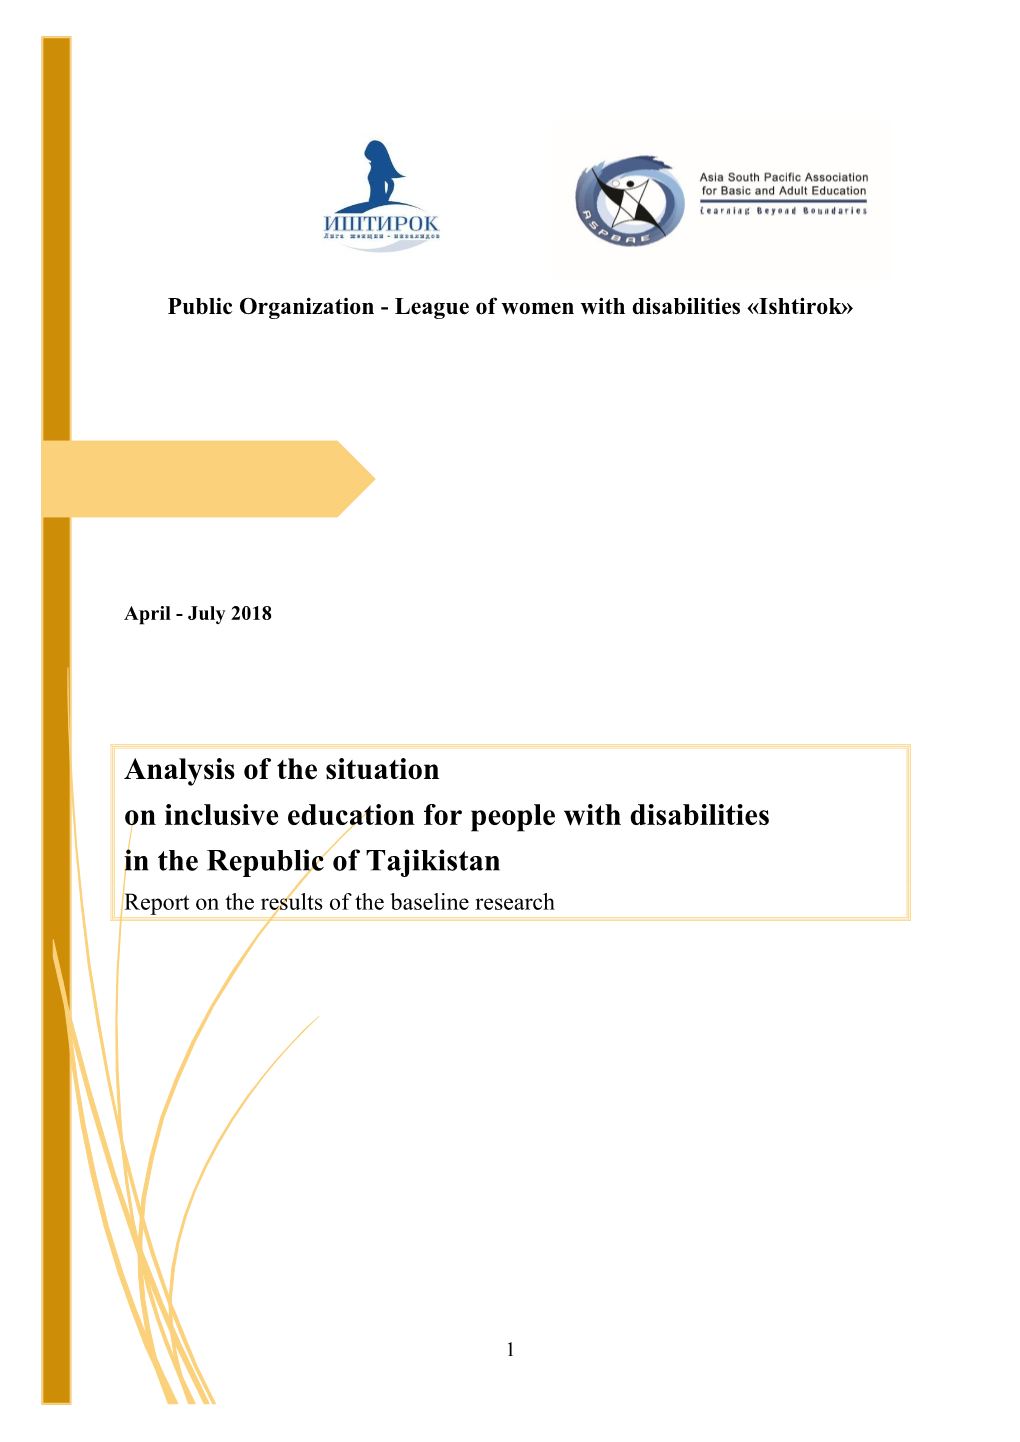 Analysis of the Situation on Inclusive Education for People with Disabilities in the Republic of Tajikistan Report on the Results of the Baseline Research